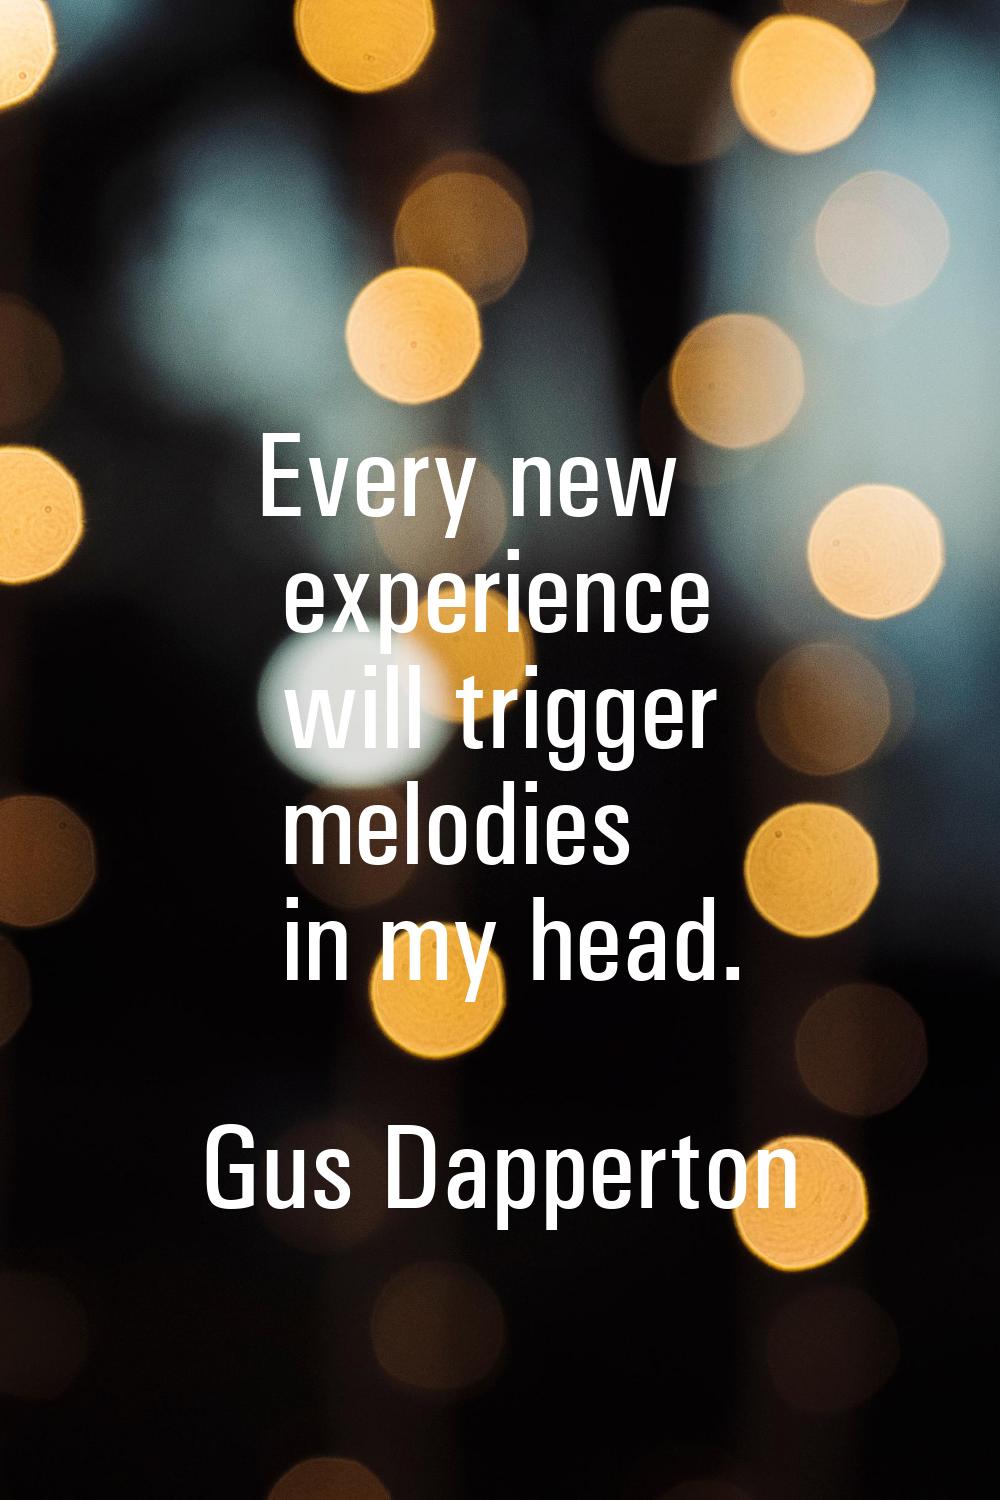 Every new experience will trigger melodies in my head.